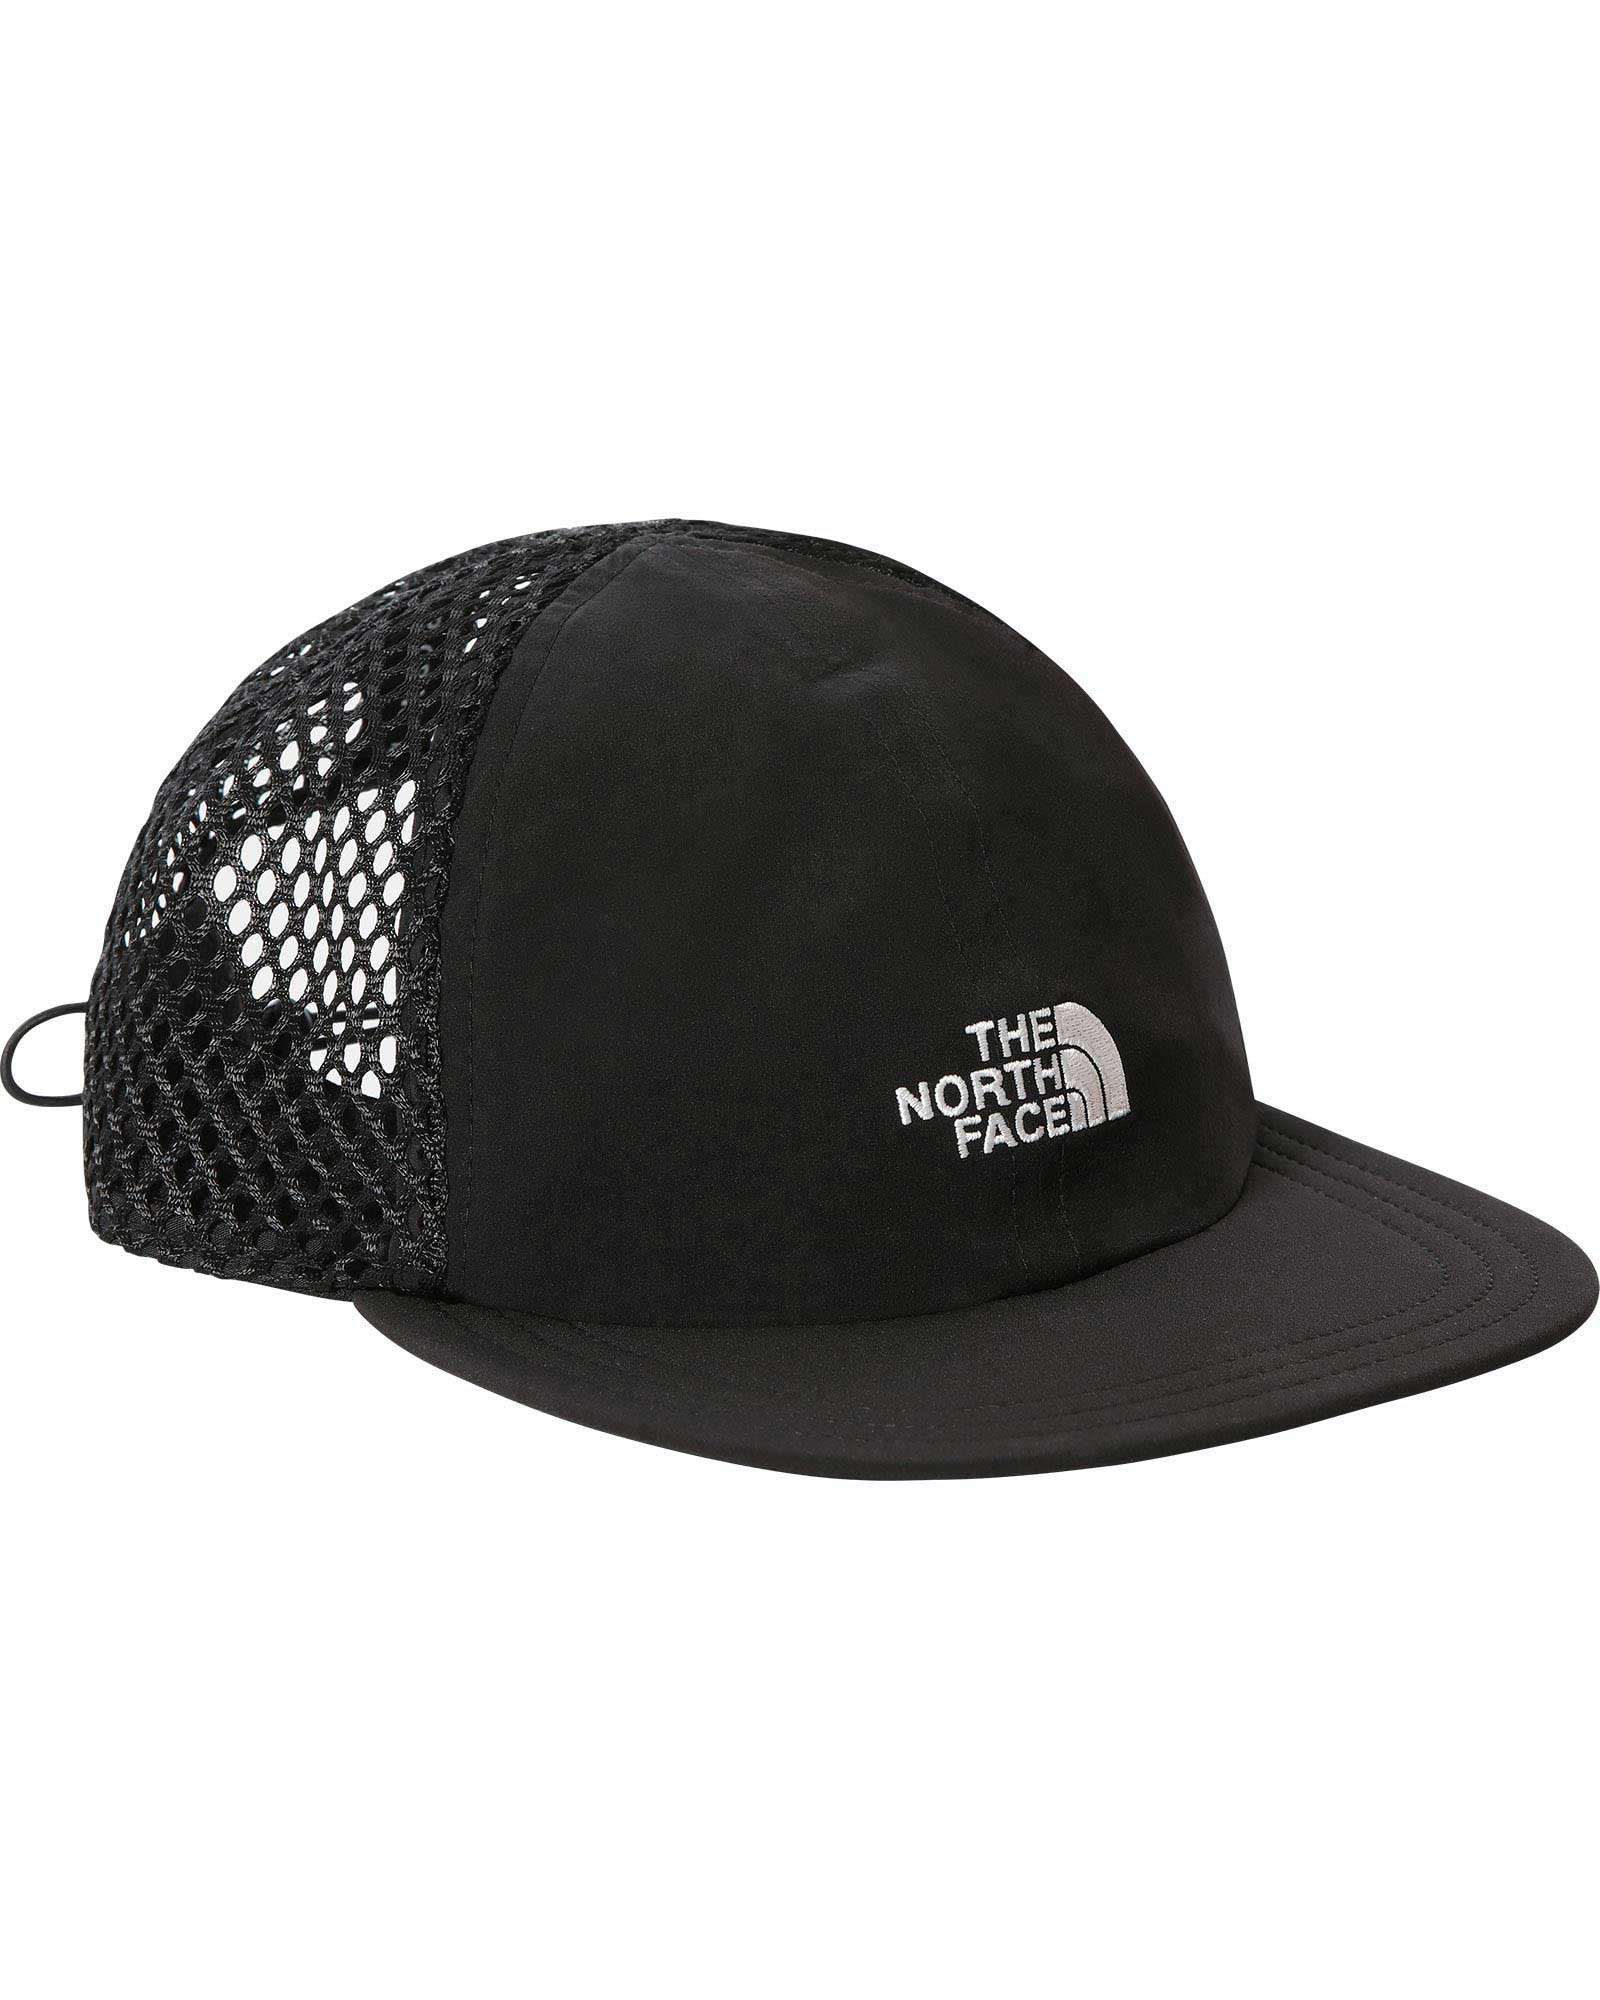 The North Face Runners Mesh Cap